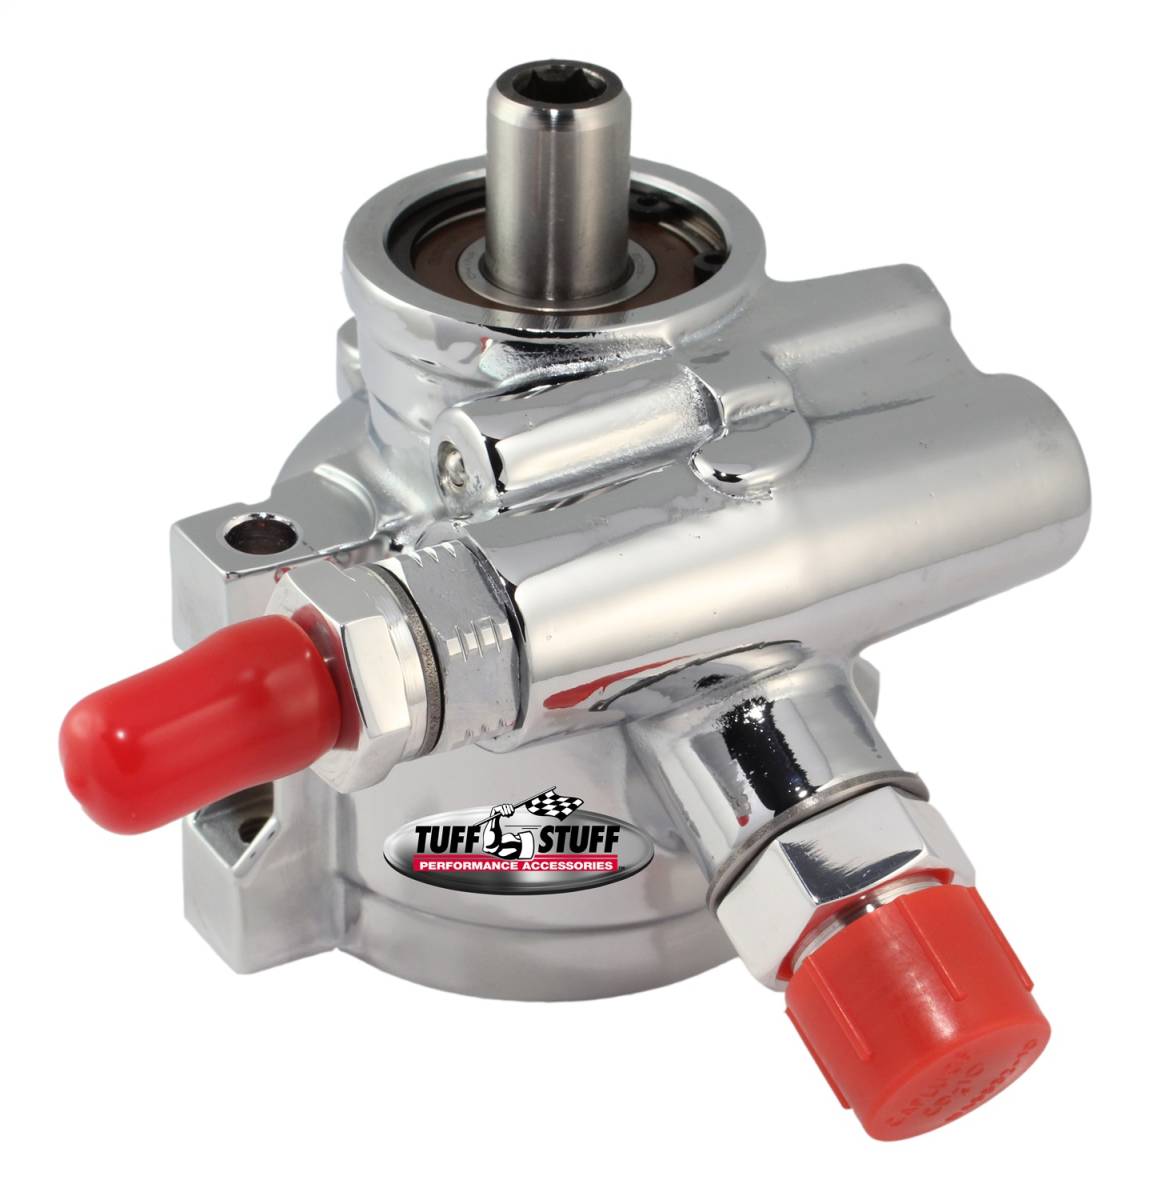 Tuff Stuff Performance - Type II Alum. Power Steering Pump AN-6 And AN-10 Fitting M8x1.25 Threaded Hole Mounting Btm Pressure Port For Street Rods/Custom Vehicles w/Limited Engine Space Polished 6170ALP-2